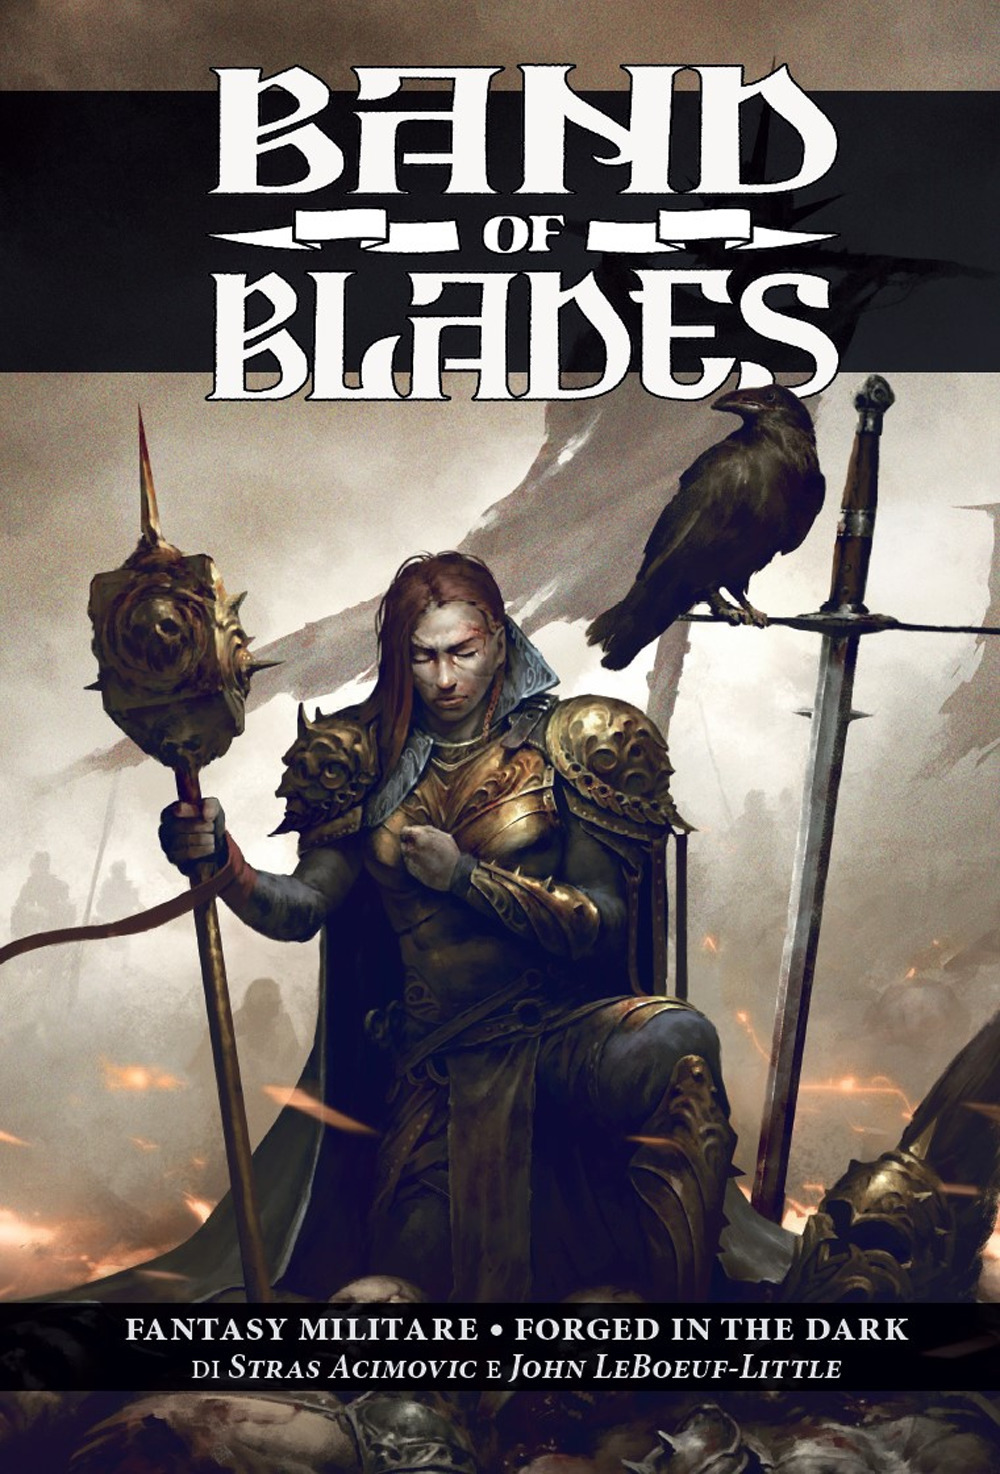 Band of blades. Fantasy militare-Forged in the dark